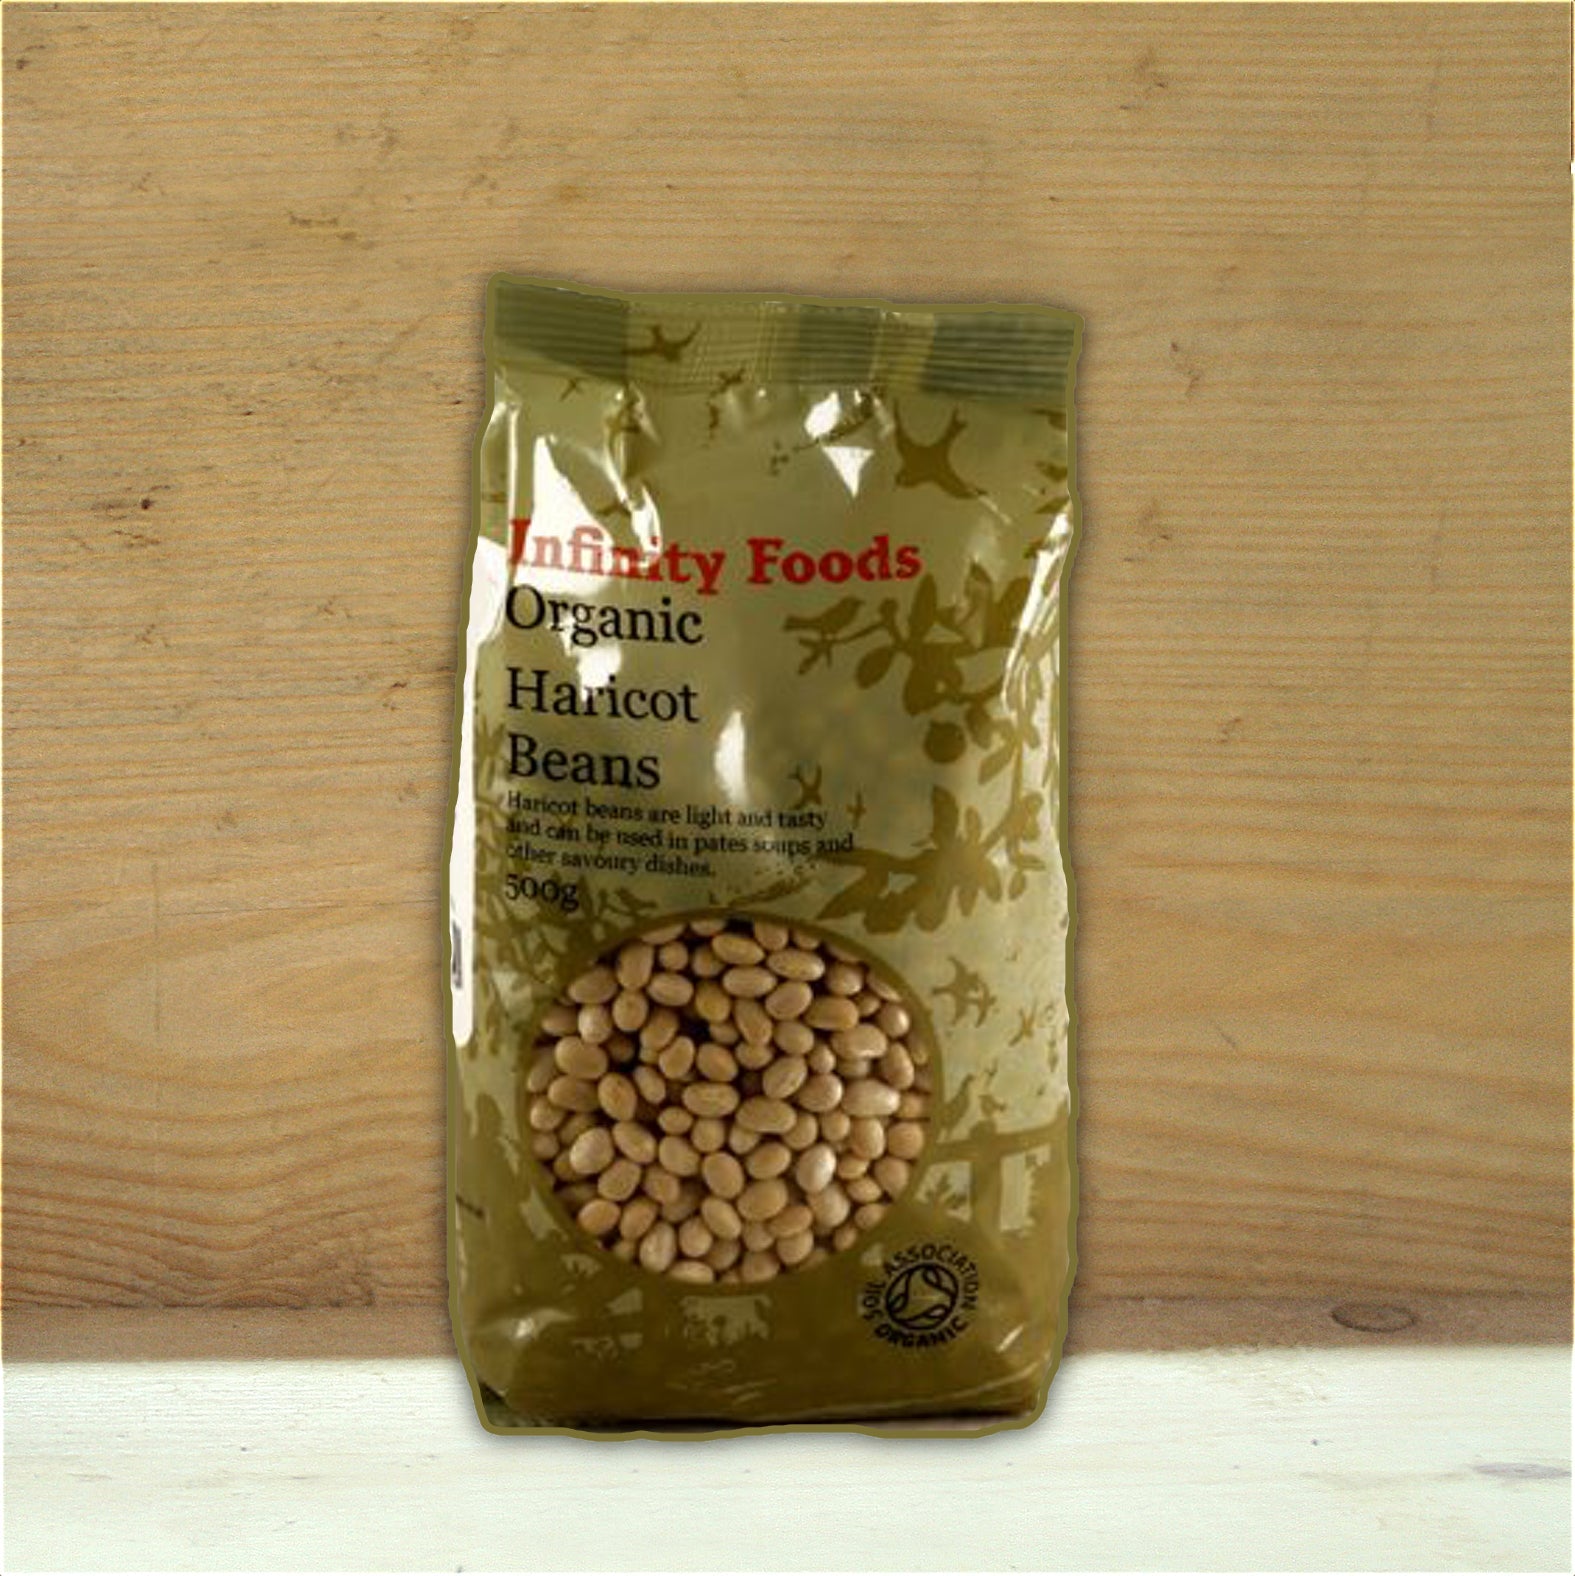 fnfinity haricot beans 500g